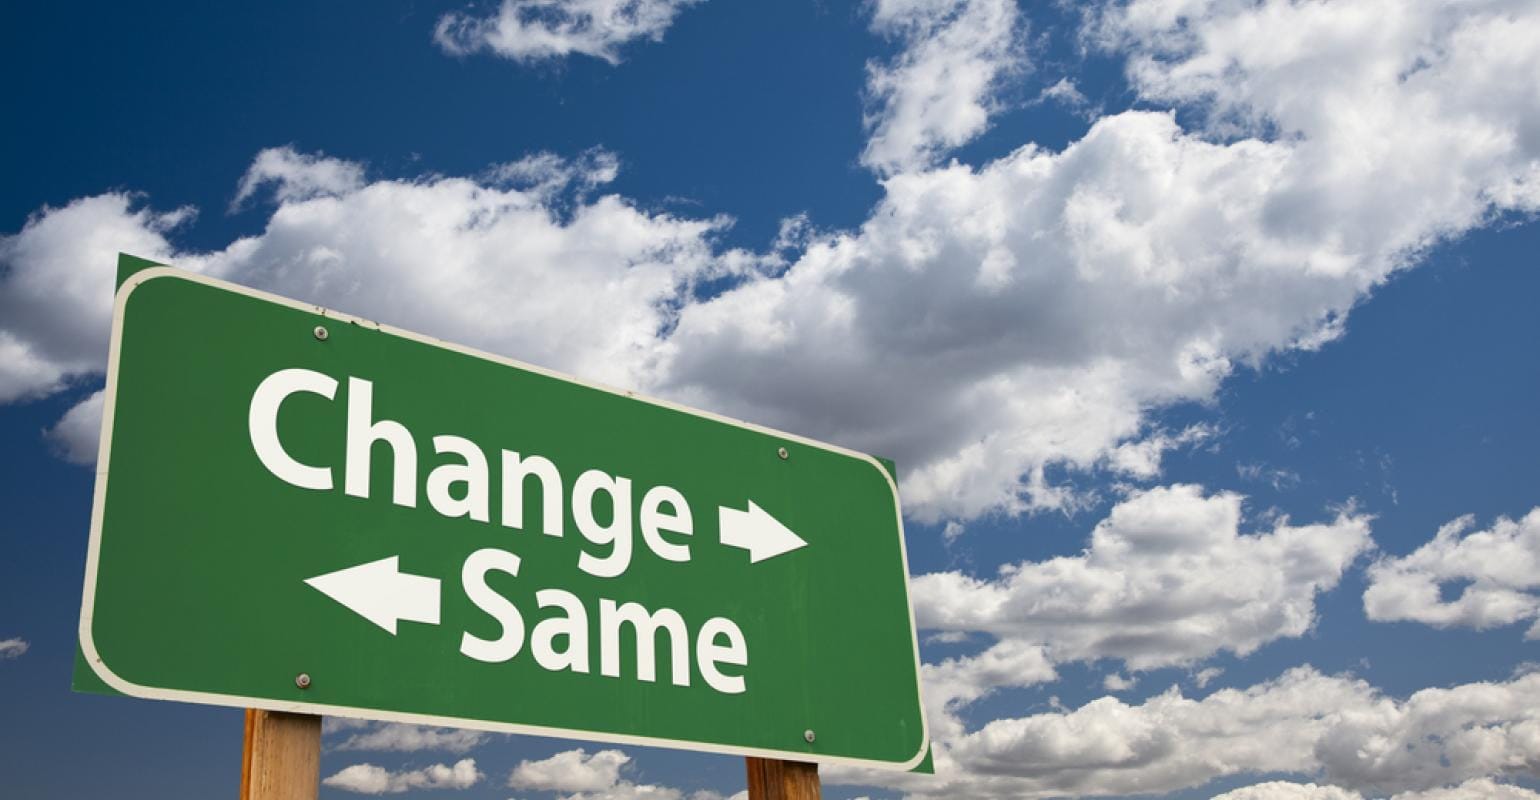 Road sign with arrows and text "change" pointing left and "same" pointing right under a cloudy blue sky.